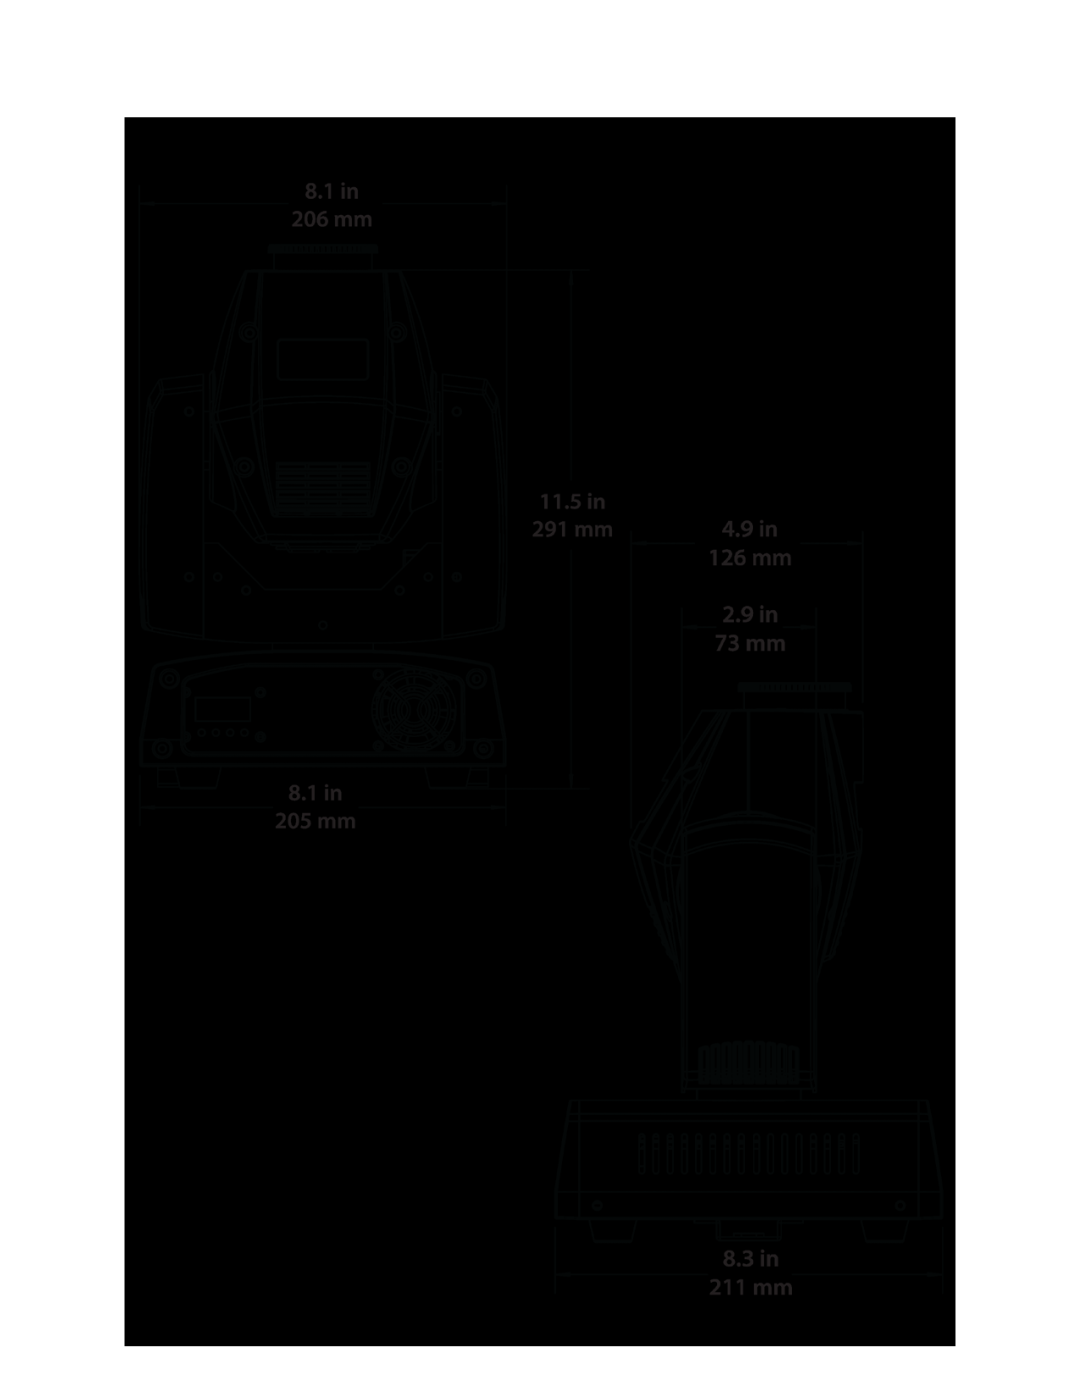 Chauvet 150 user manual Product Dimensions, Page 6 of 